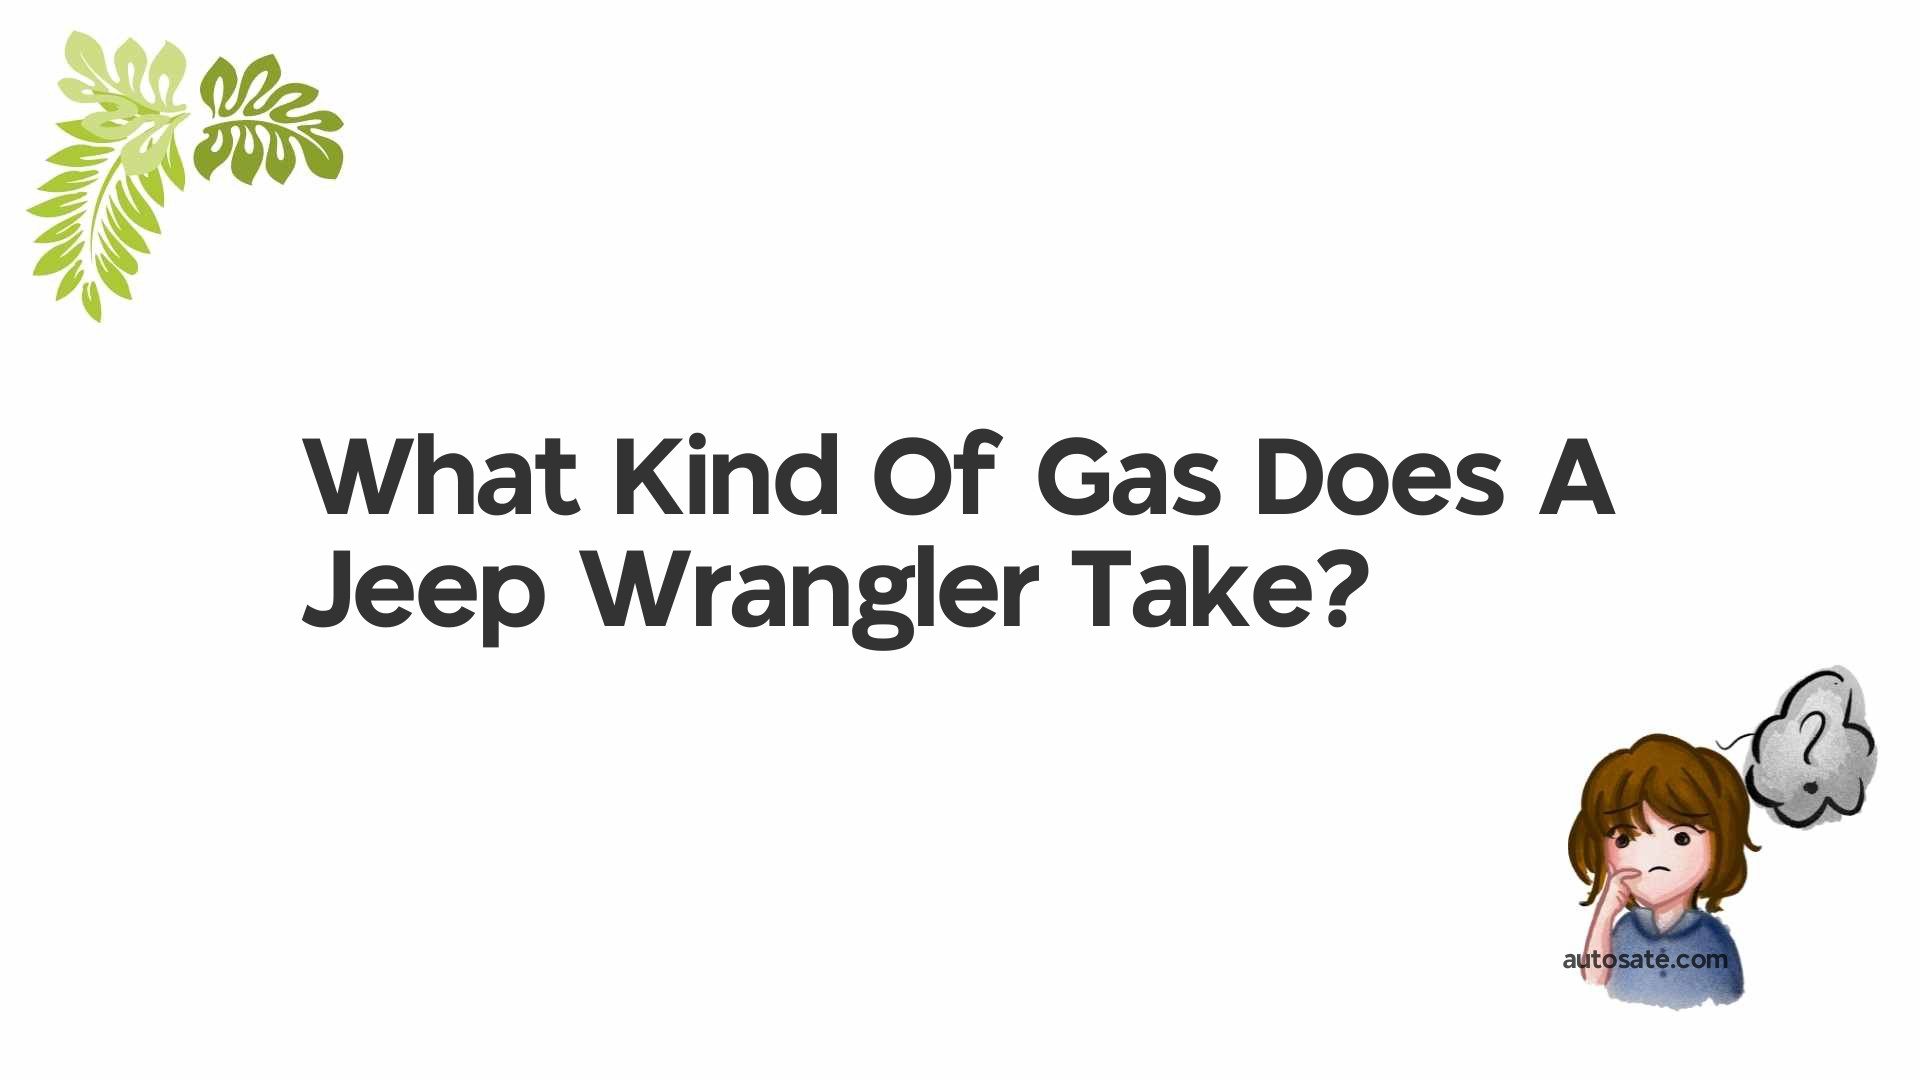 What Kind Of Gas Does A Jeep Wrangler Take?